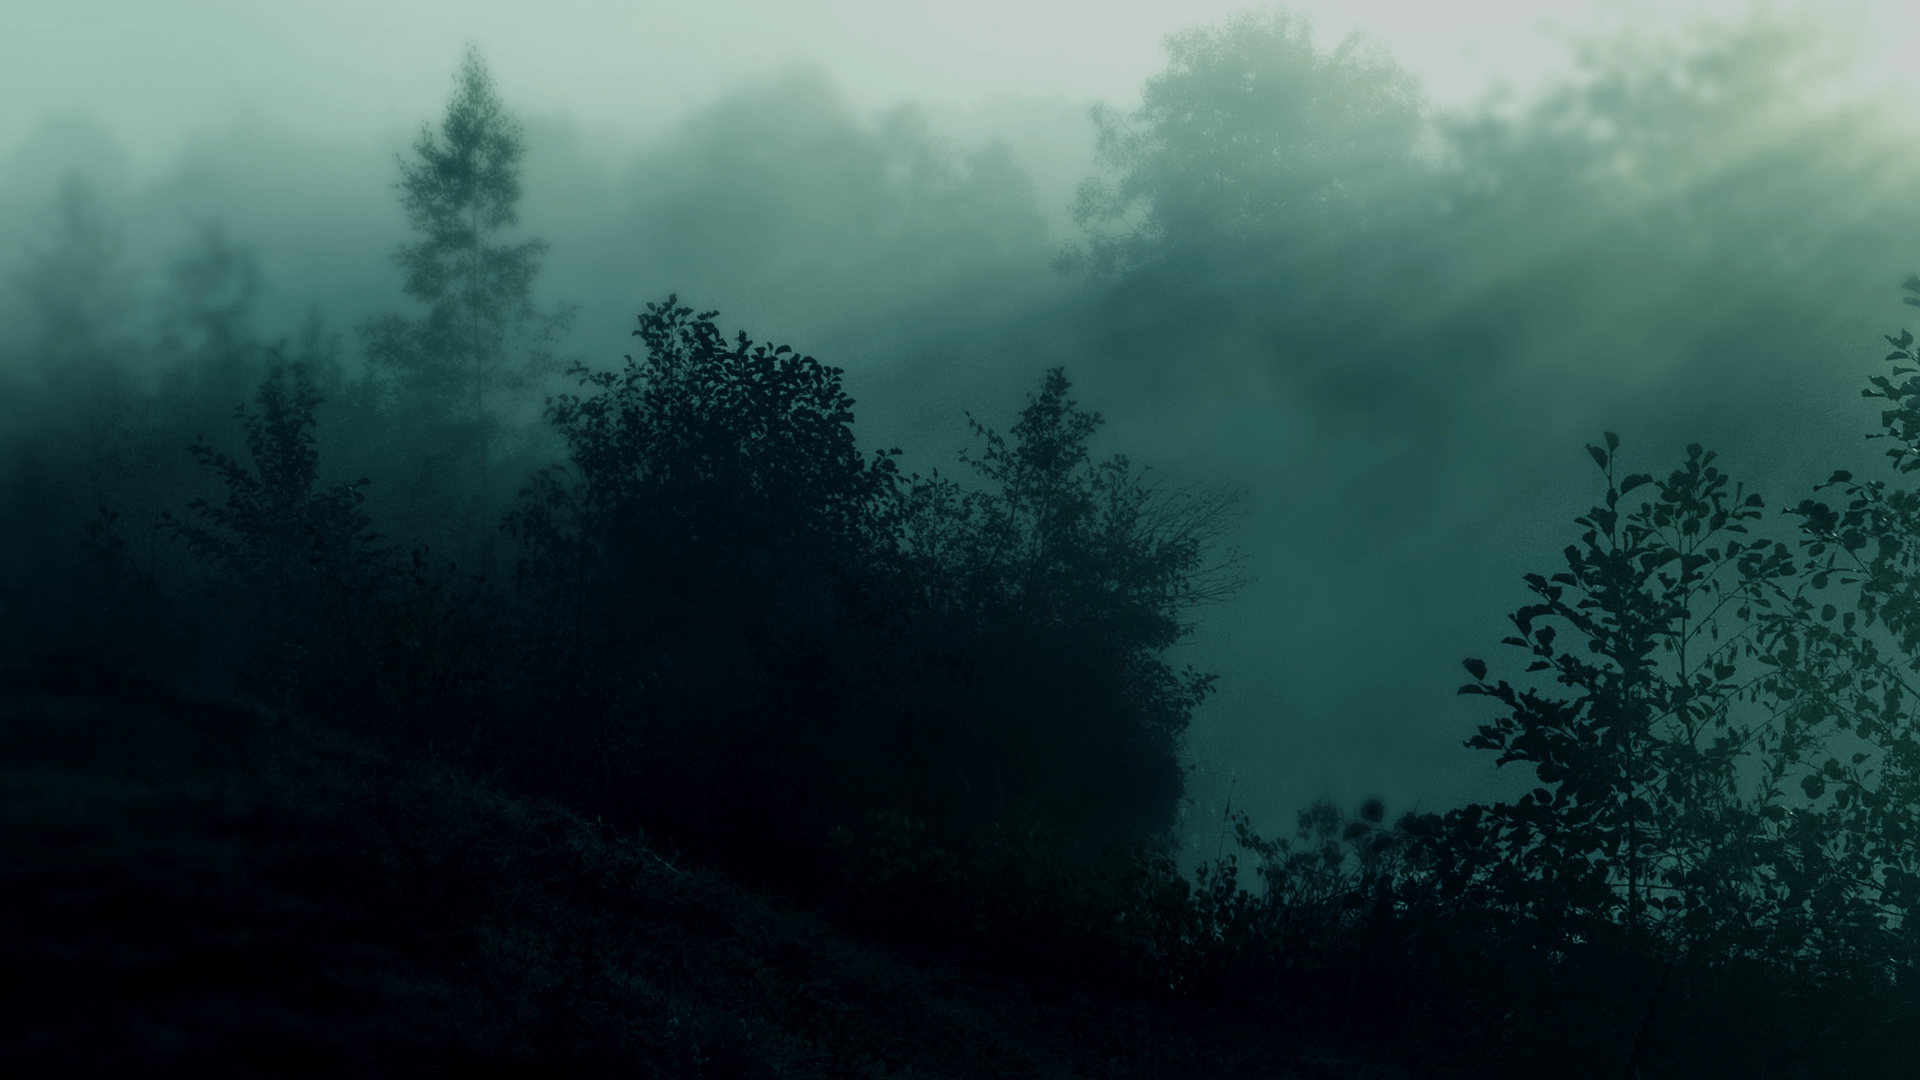 A foggy forest with trees and grass - Dark green, nature, foggy forest